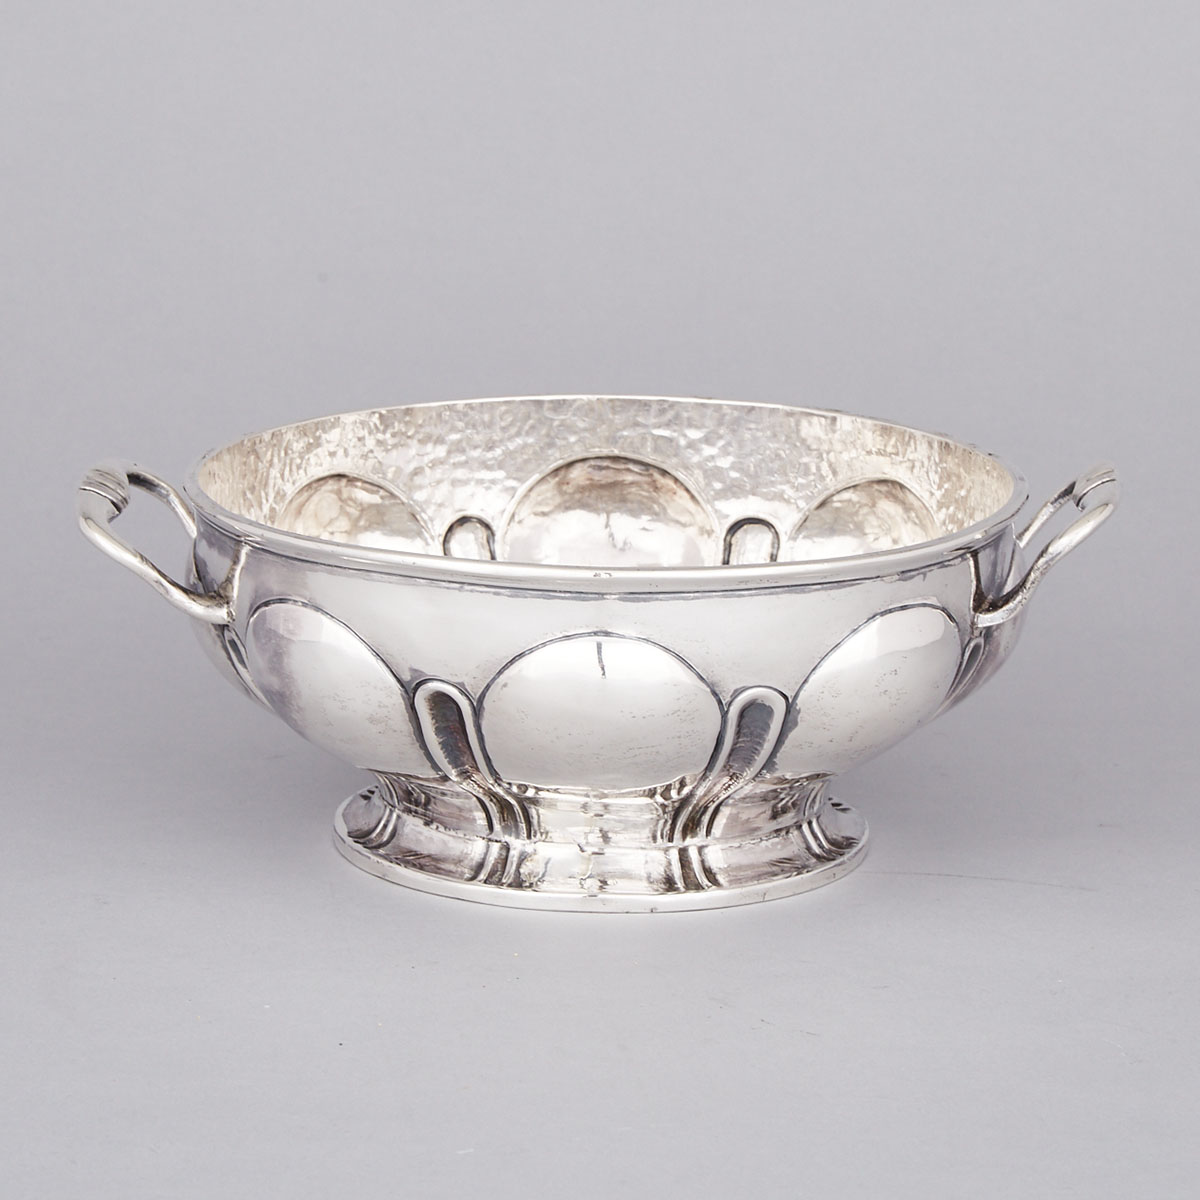 Mexican Silver Two-Handled Bowl, Plateria Mendoza, Mexico City, 20th century